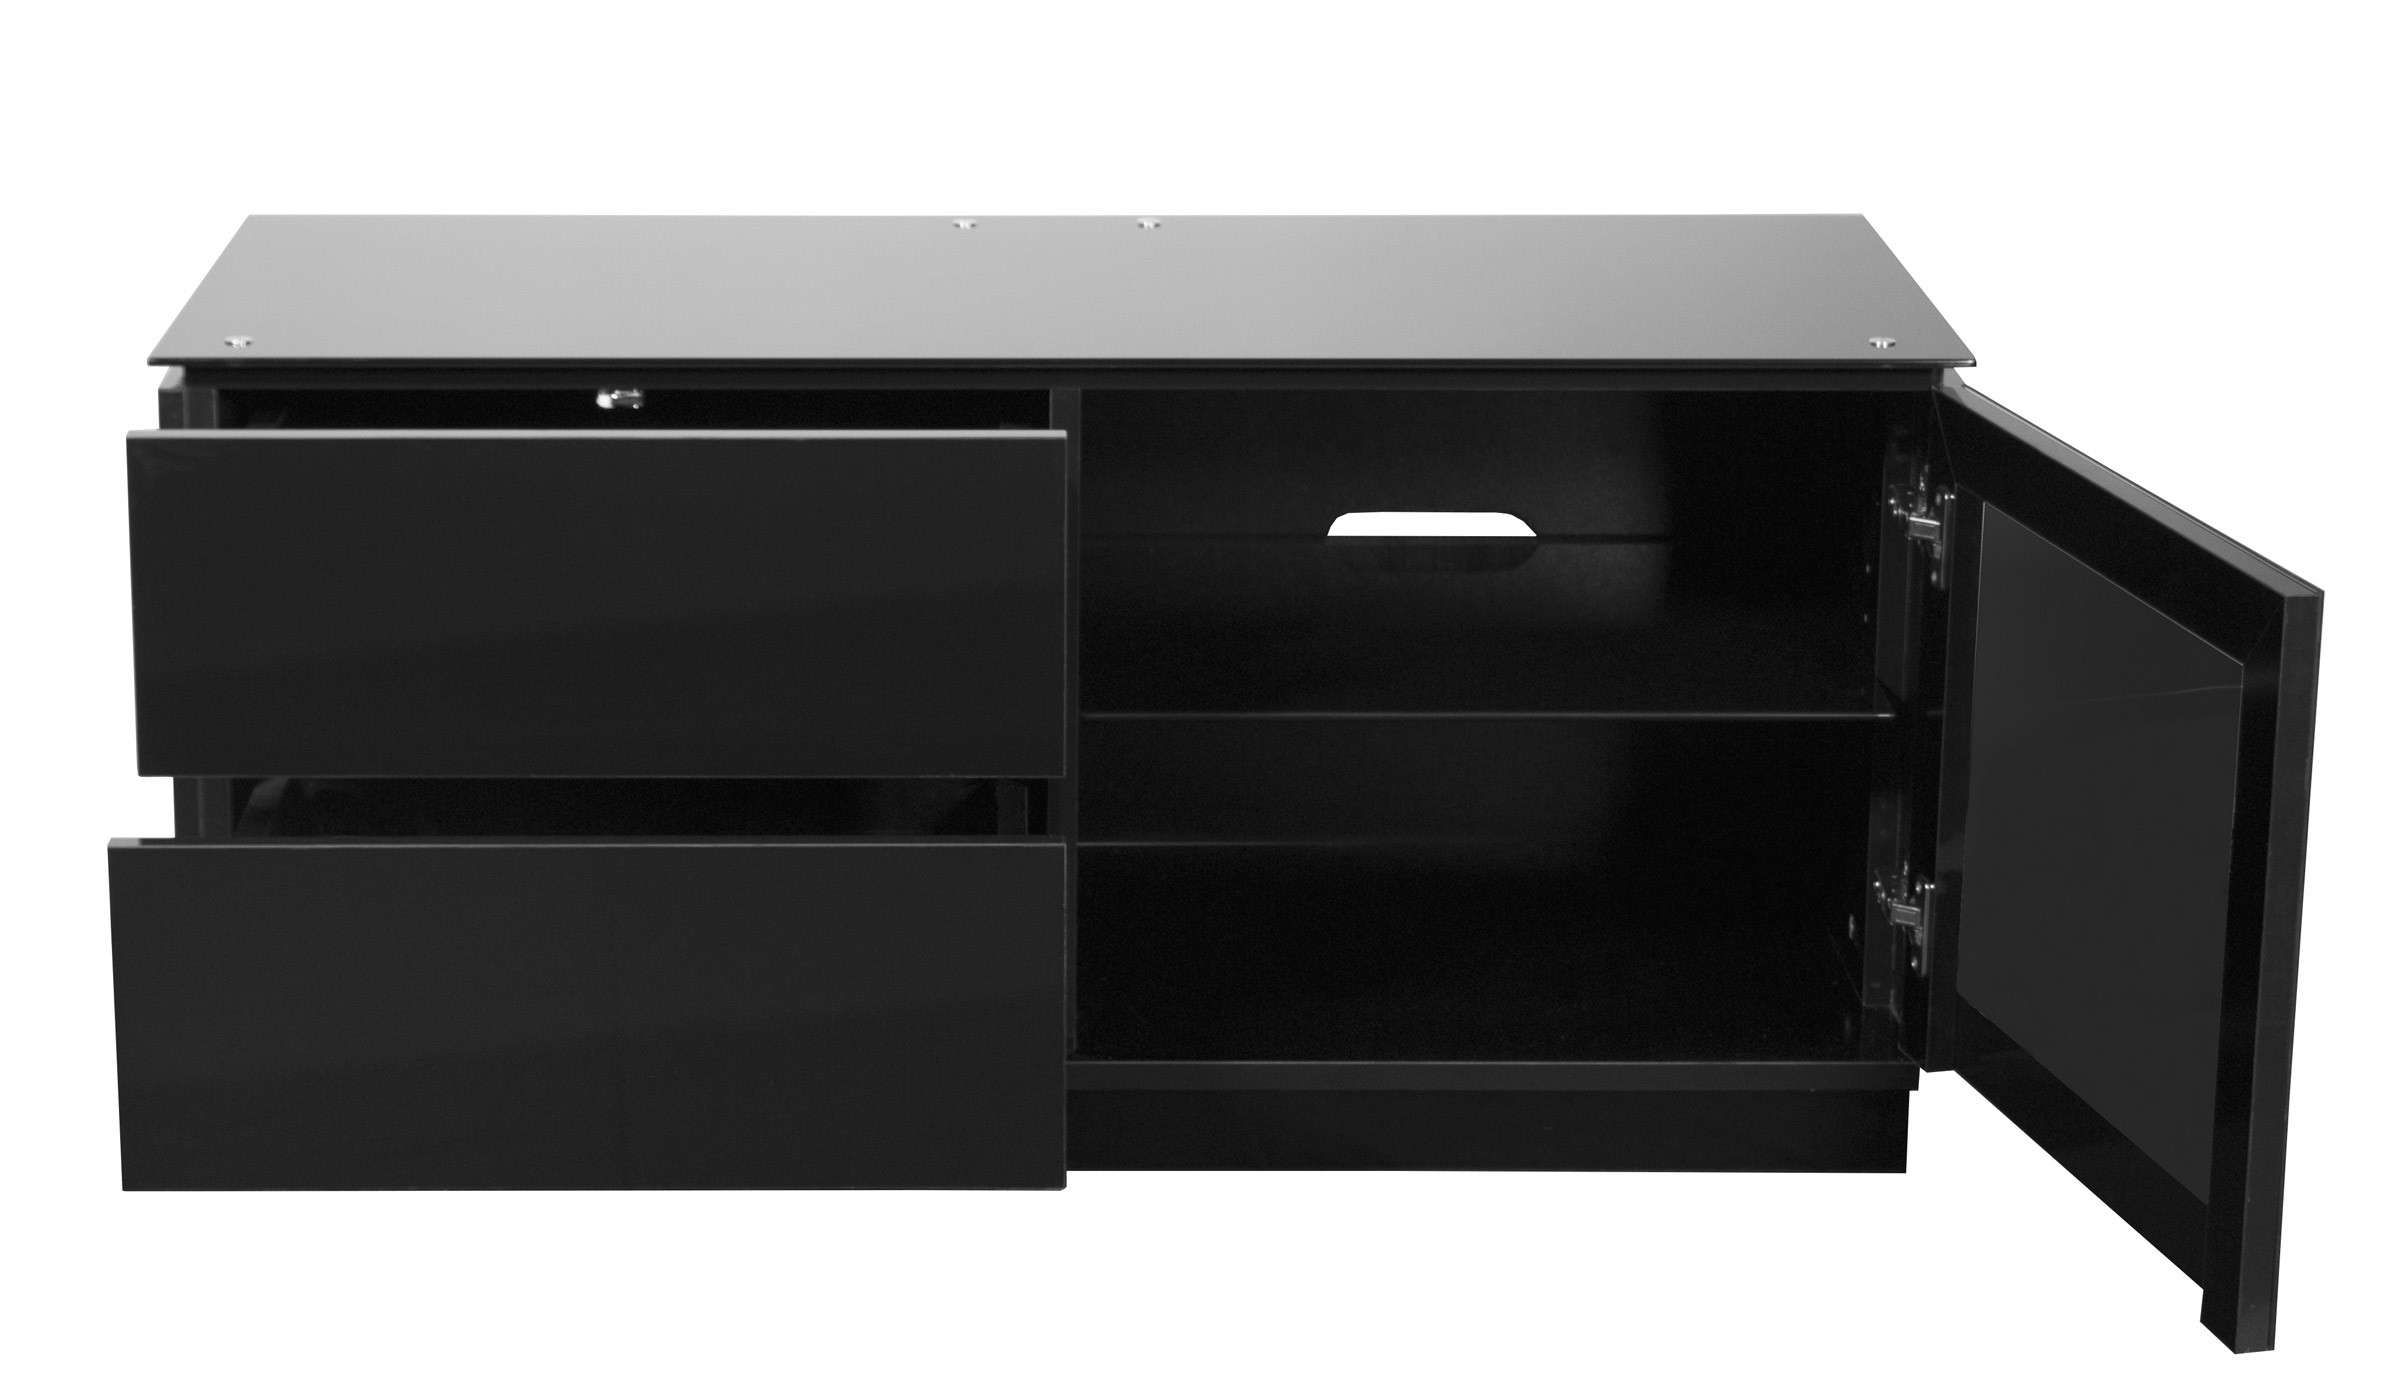 Black Gloss Tv Cabinet Up To 50" Tv | Casino Mmt C1100 Within Tv Cabinets With Drawers (View 10 of 20)